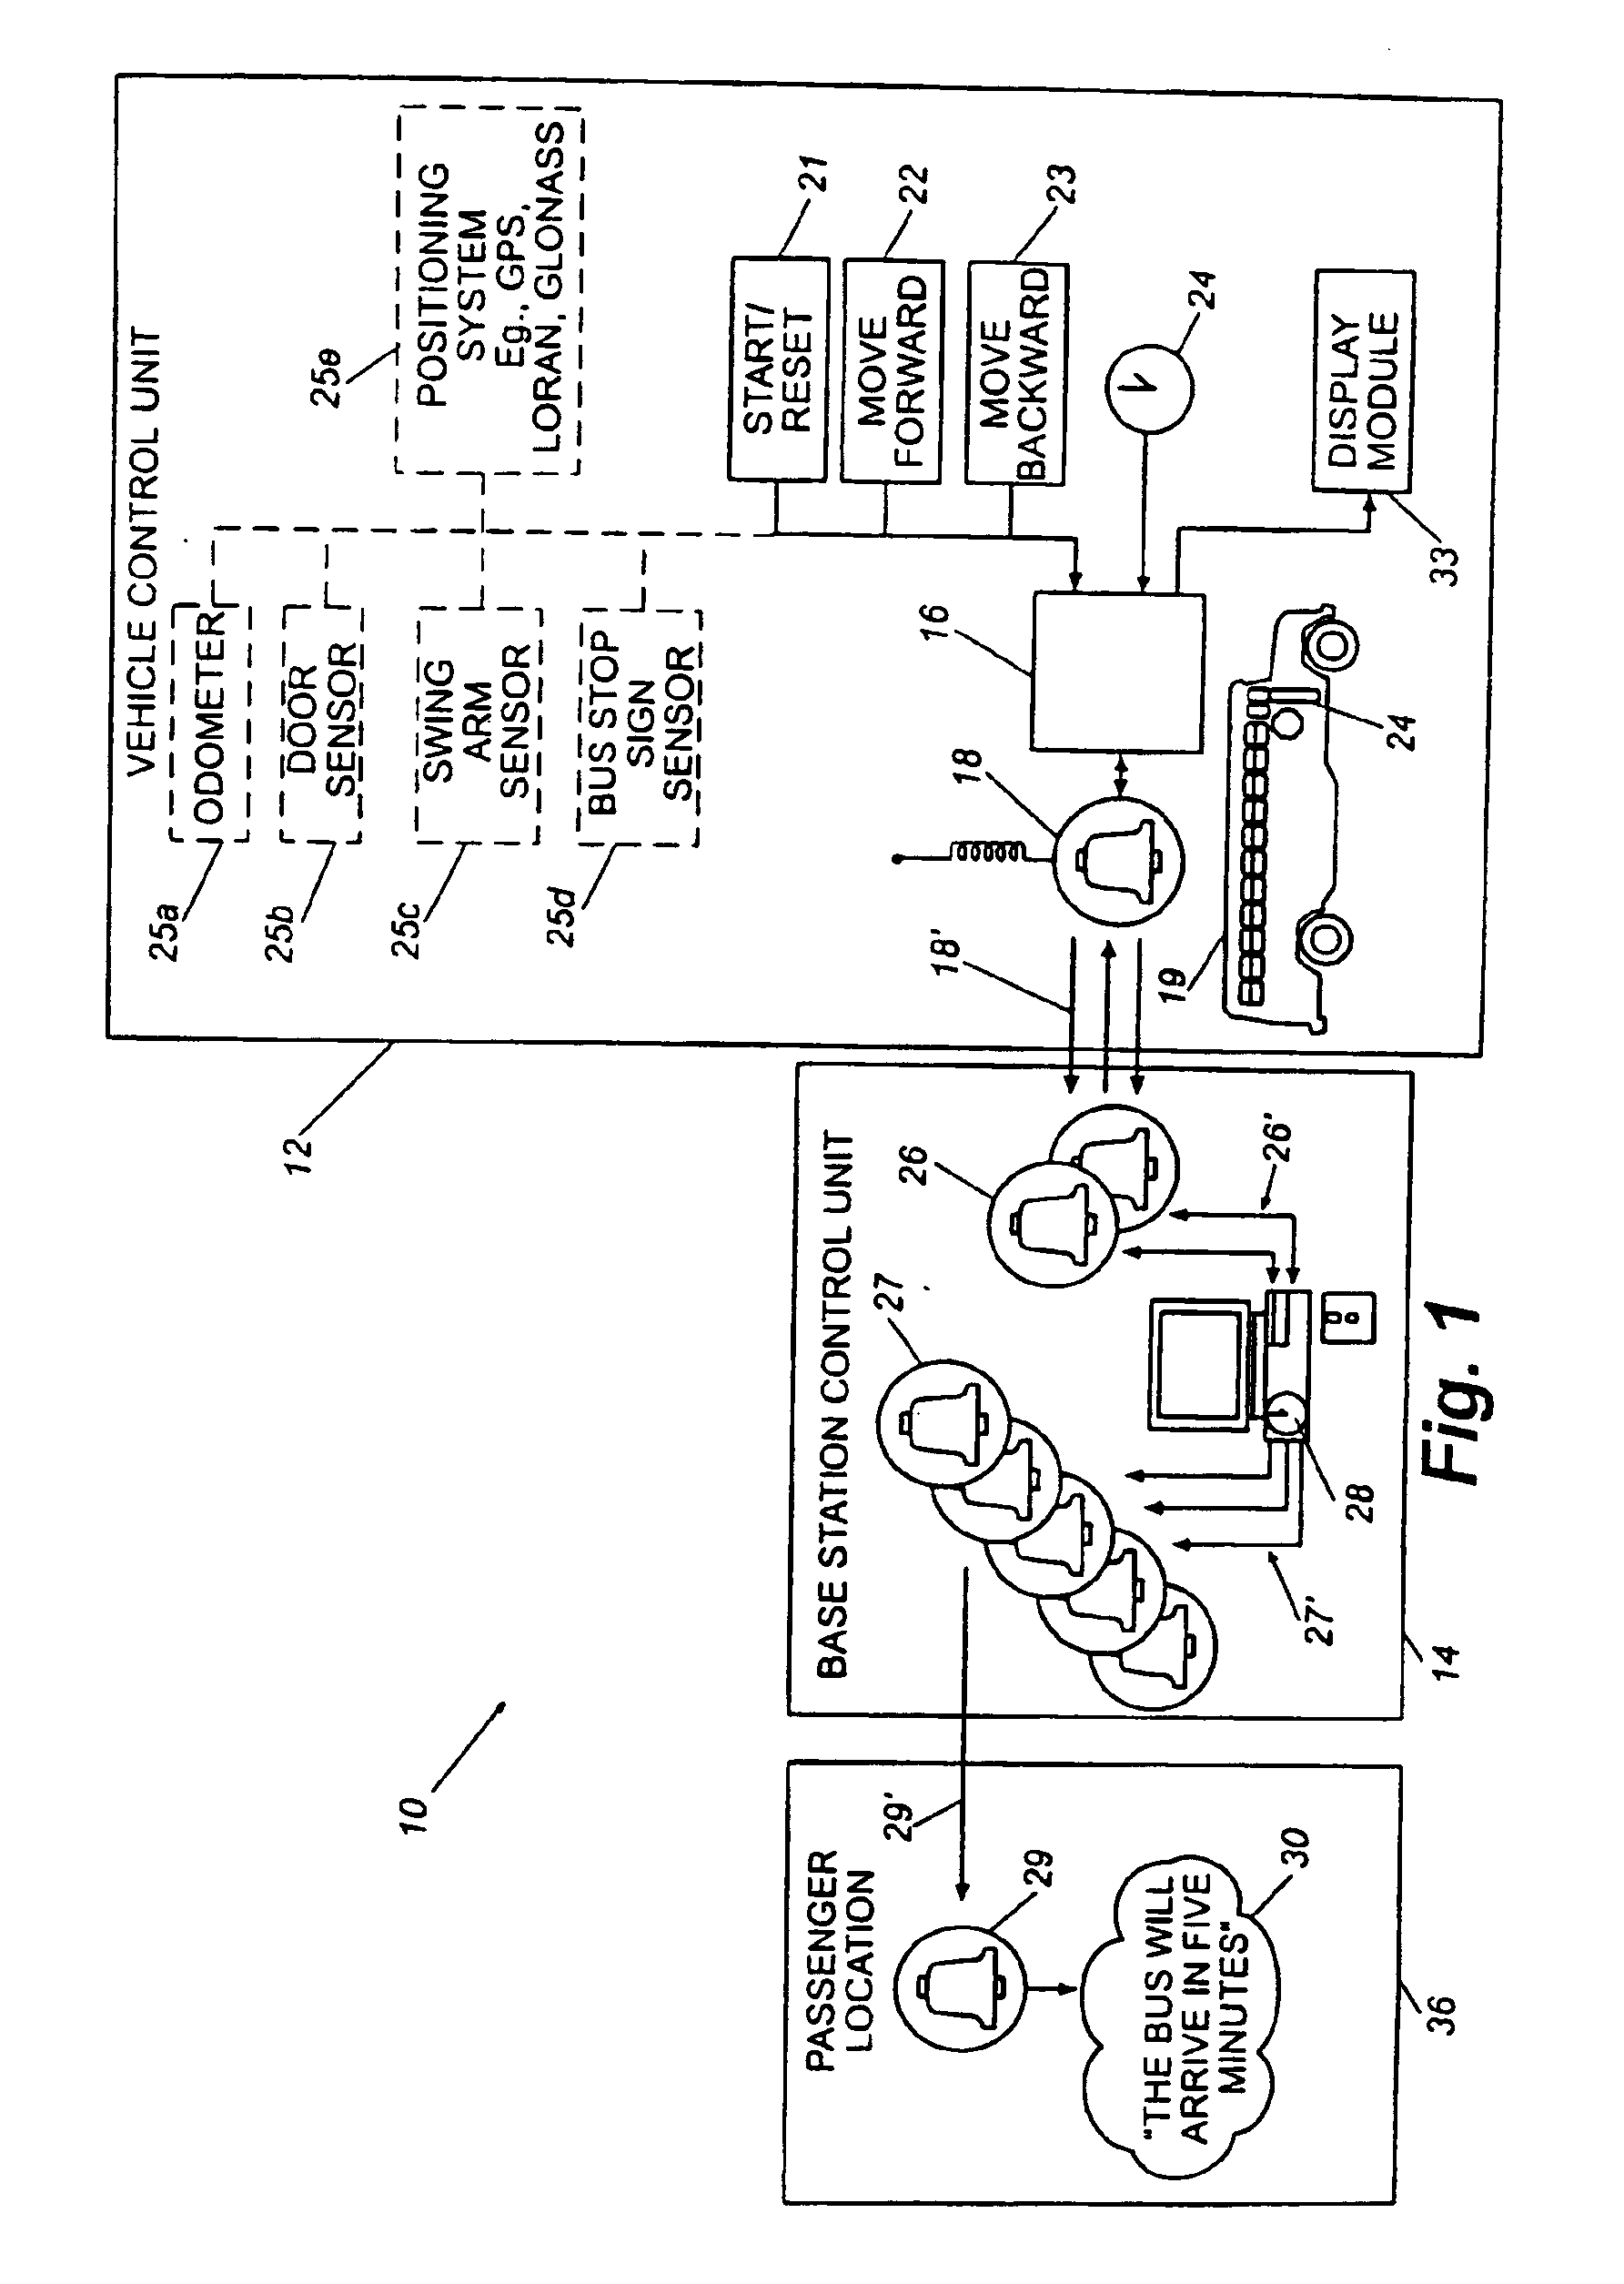 Notification system and method that informs a party of vehicle delay